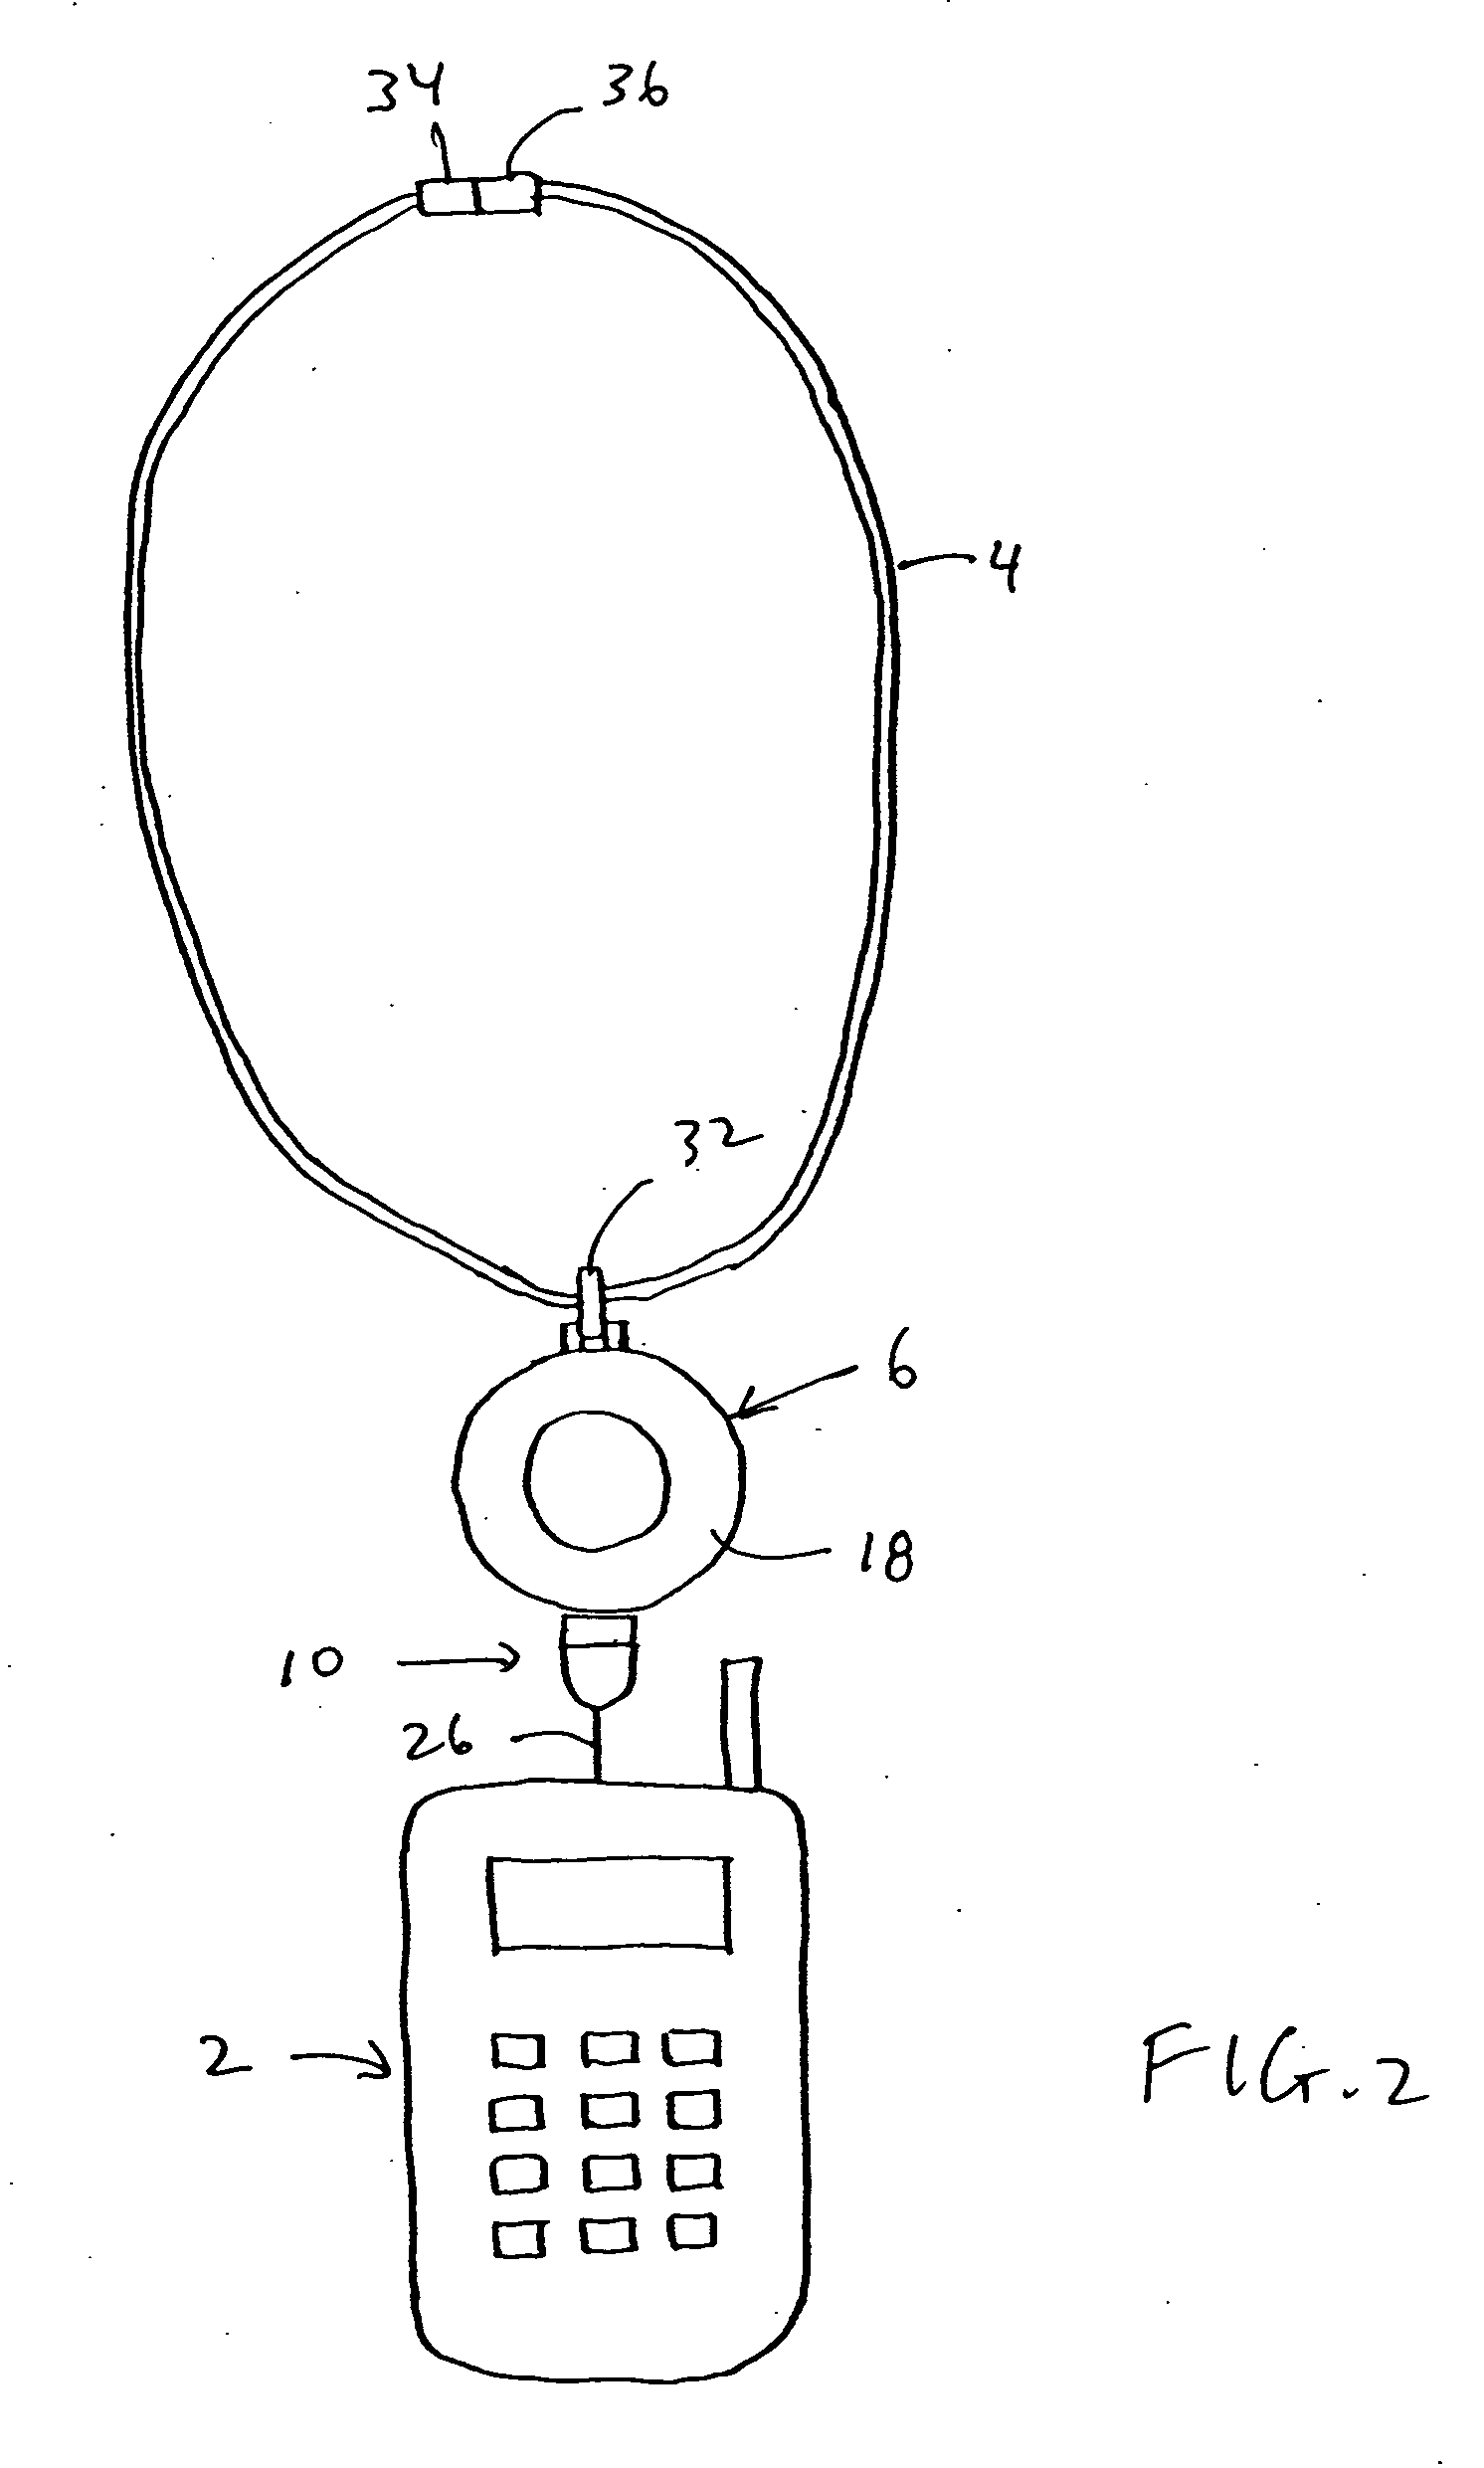 System for carrying portable device